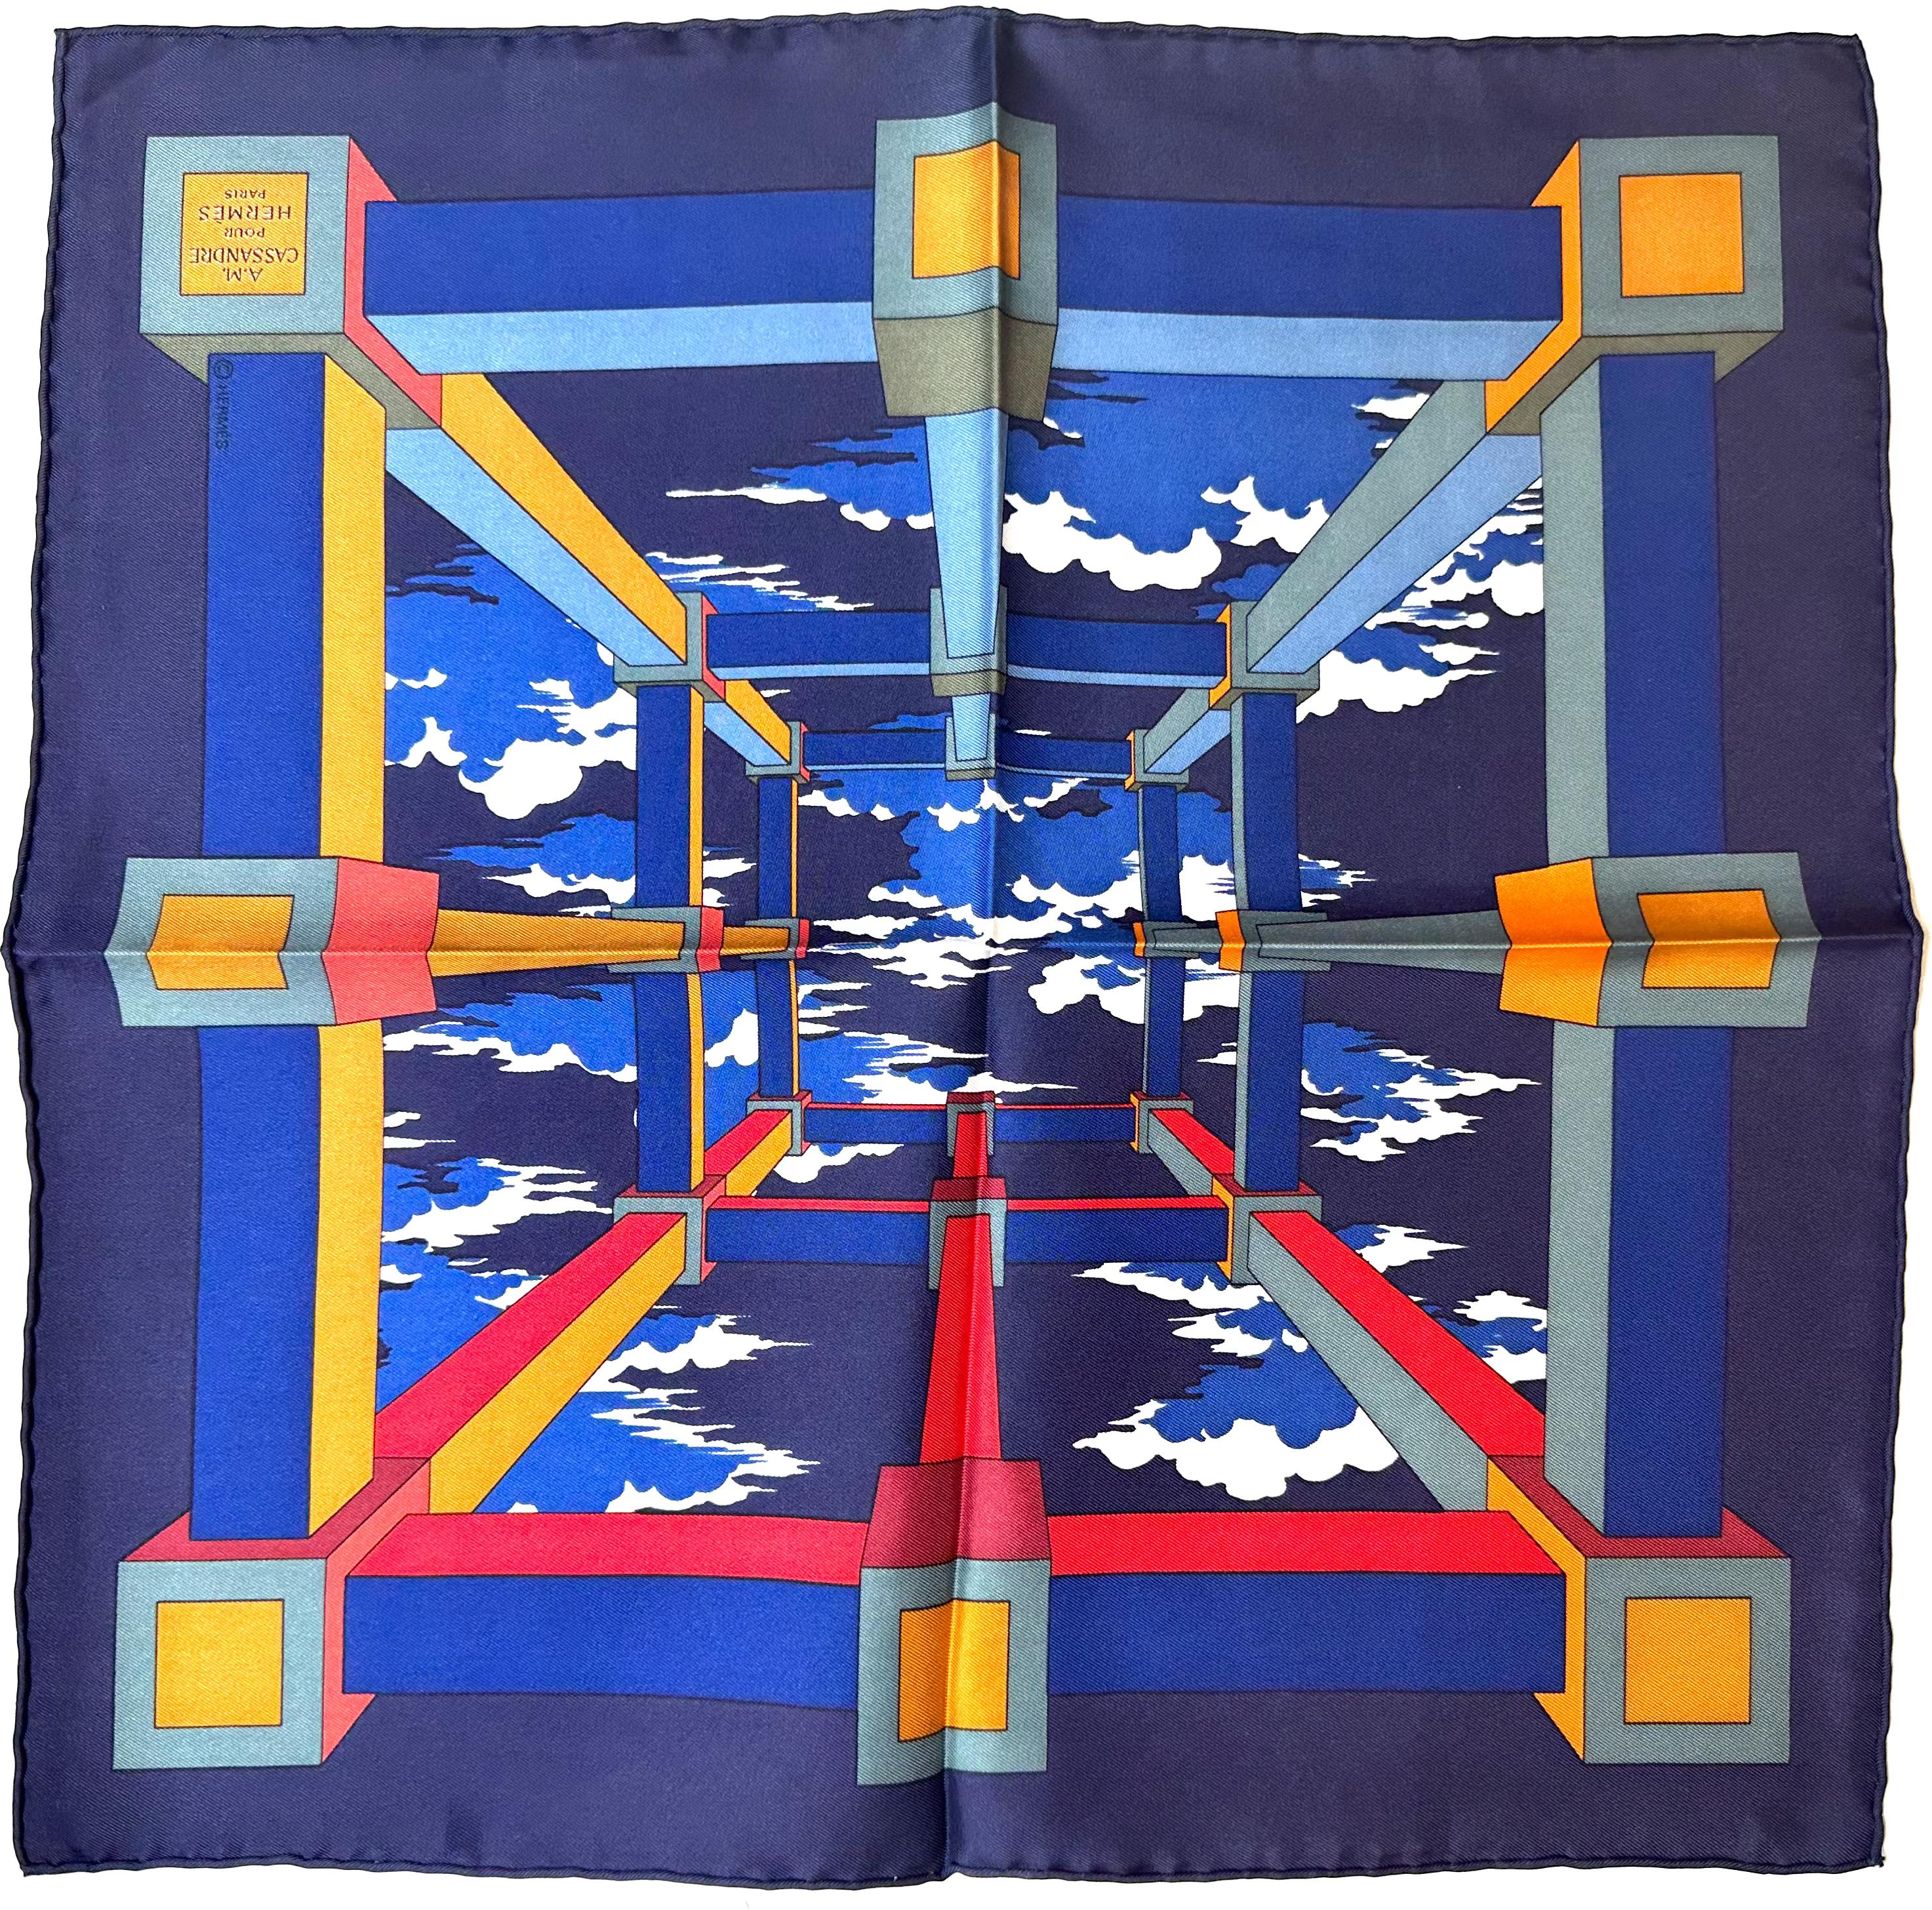 Four Hermes Small Silk Scarves
Comprising, Constellations, designed by Pierre Peron, Fall Leaf, abstract Clouds, designed by A.M. Cassandre, and another in tones of pink, lavender and light green. (4)